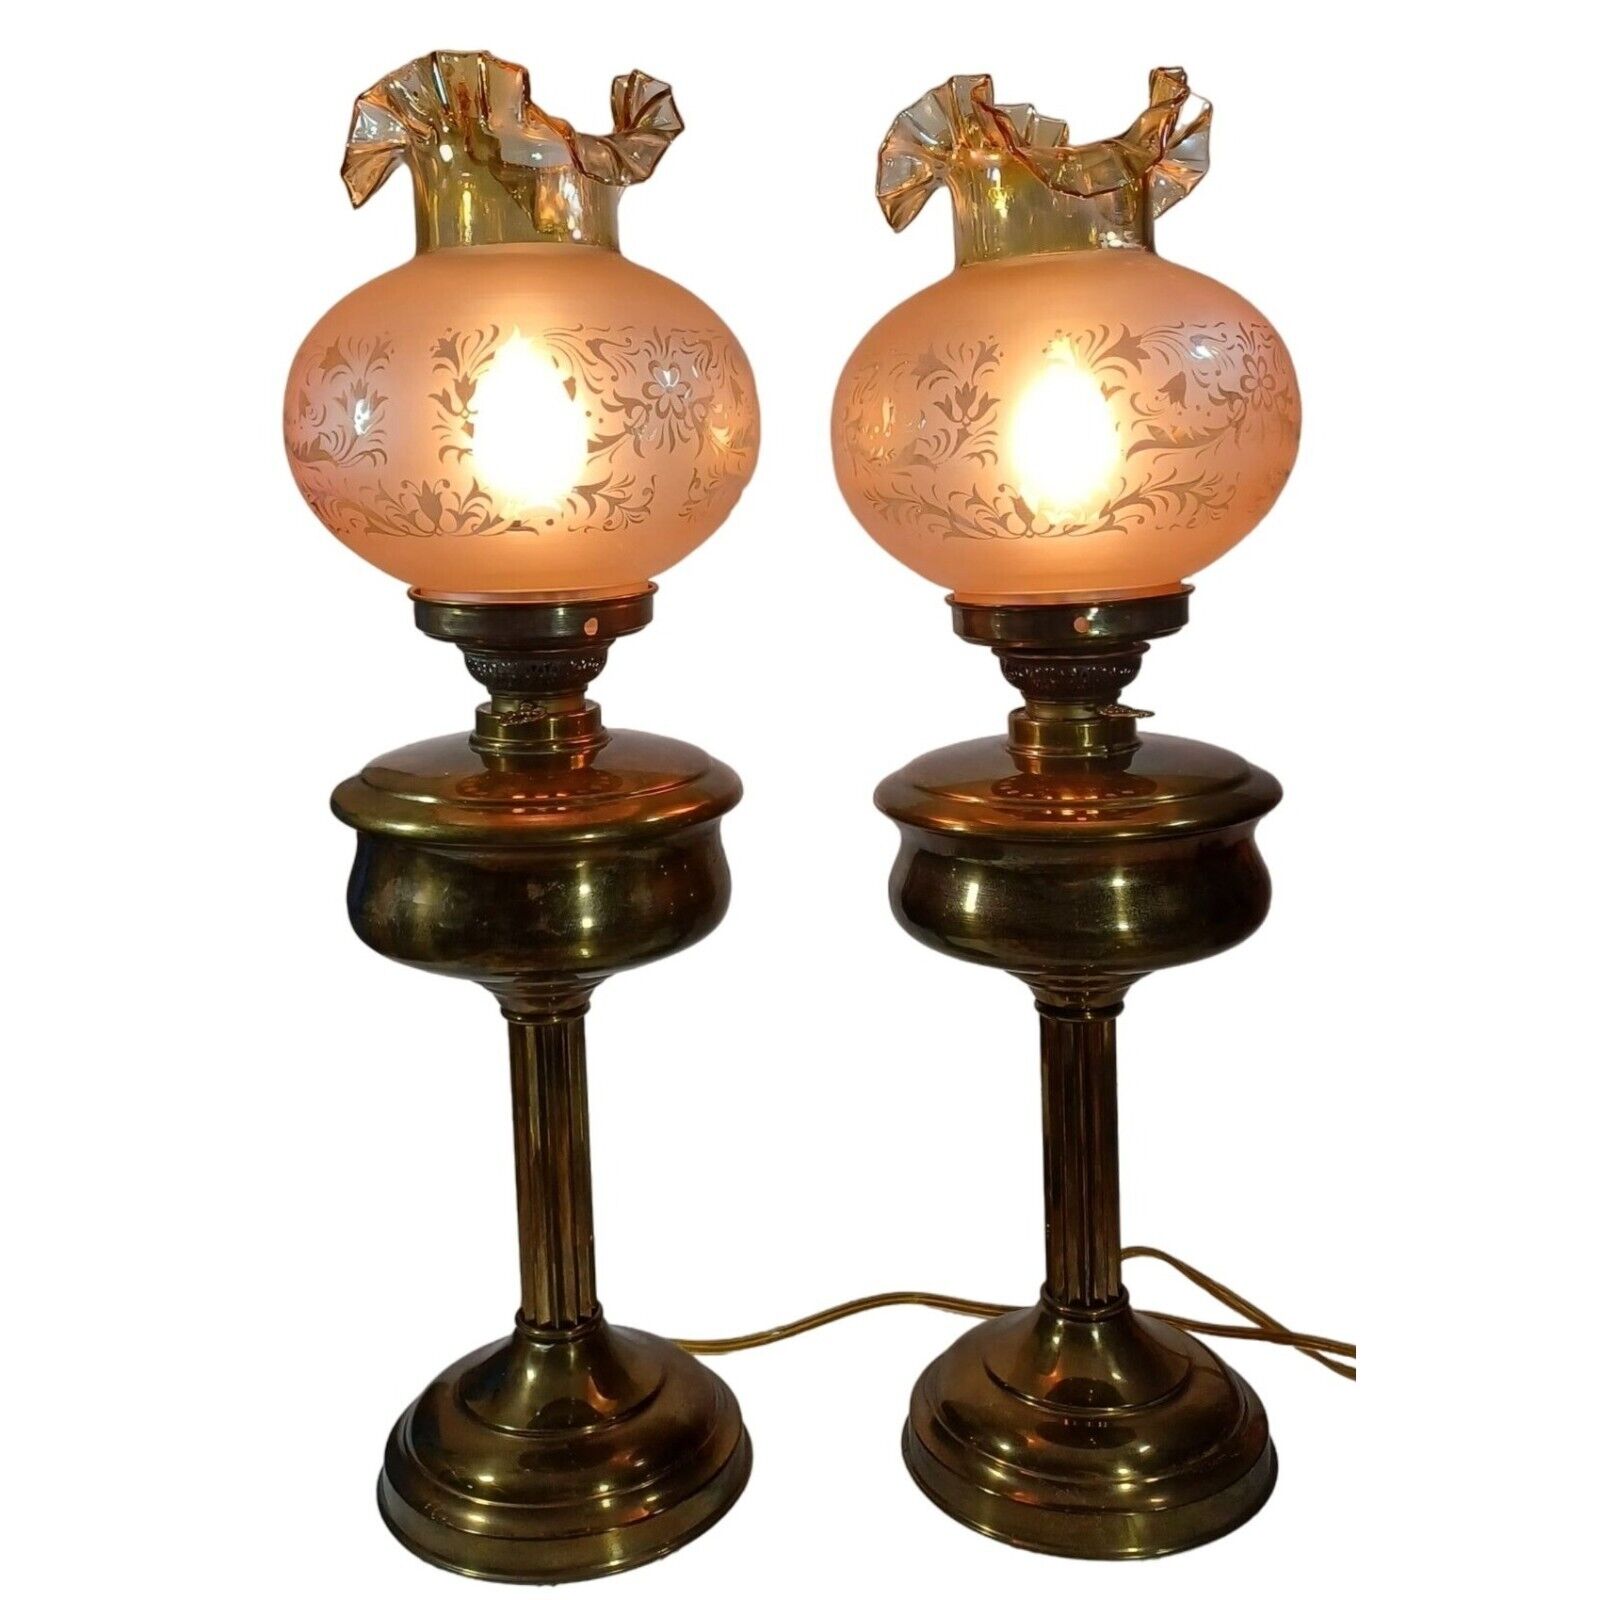 Antique Hurricane Oil Lamps Converted Electric Iridescent Fenton Amber Shades